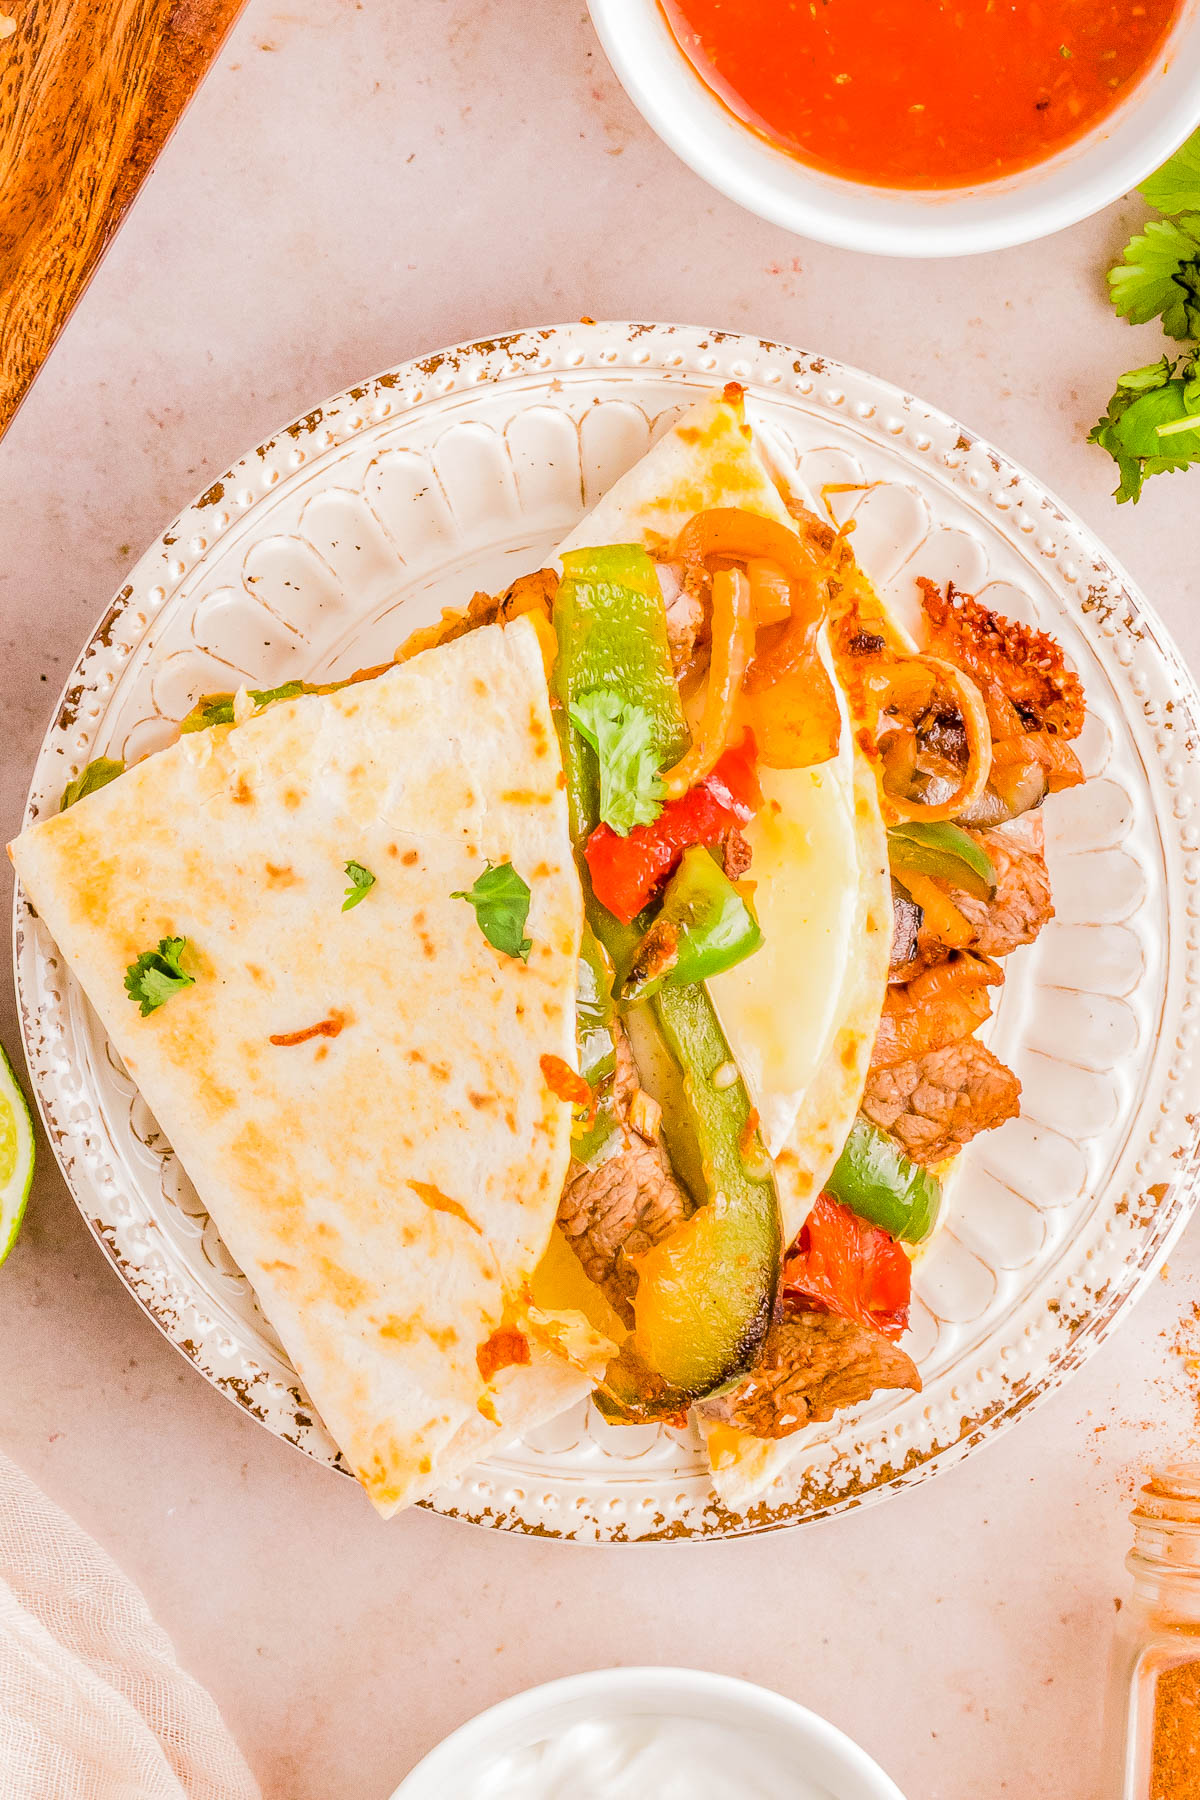 A plate with a half-folded quesadilla filled with beef, bell peppers, and melted cheese, served next to a bowl of salsa.